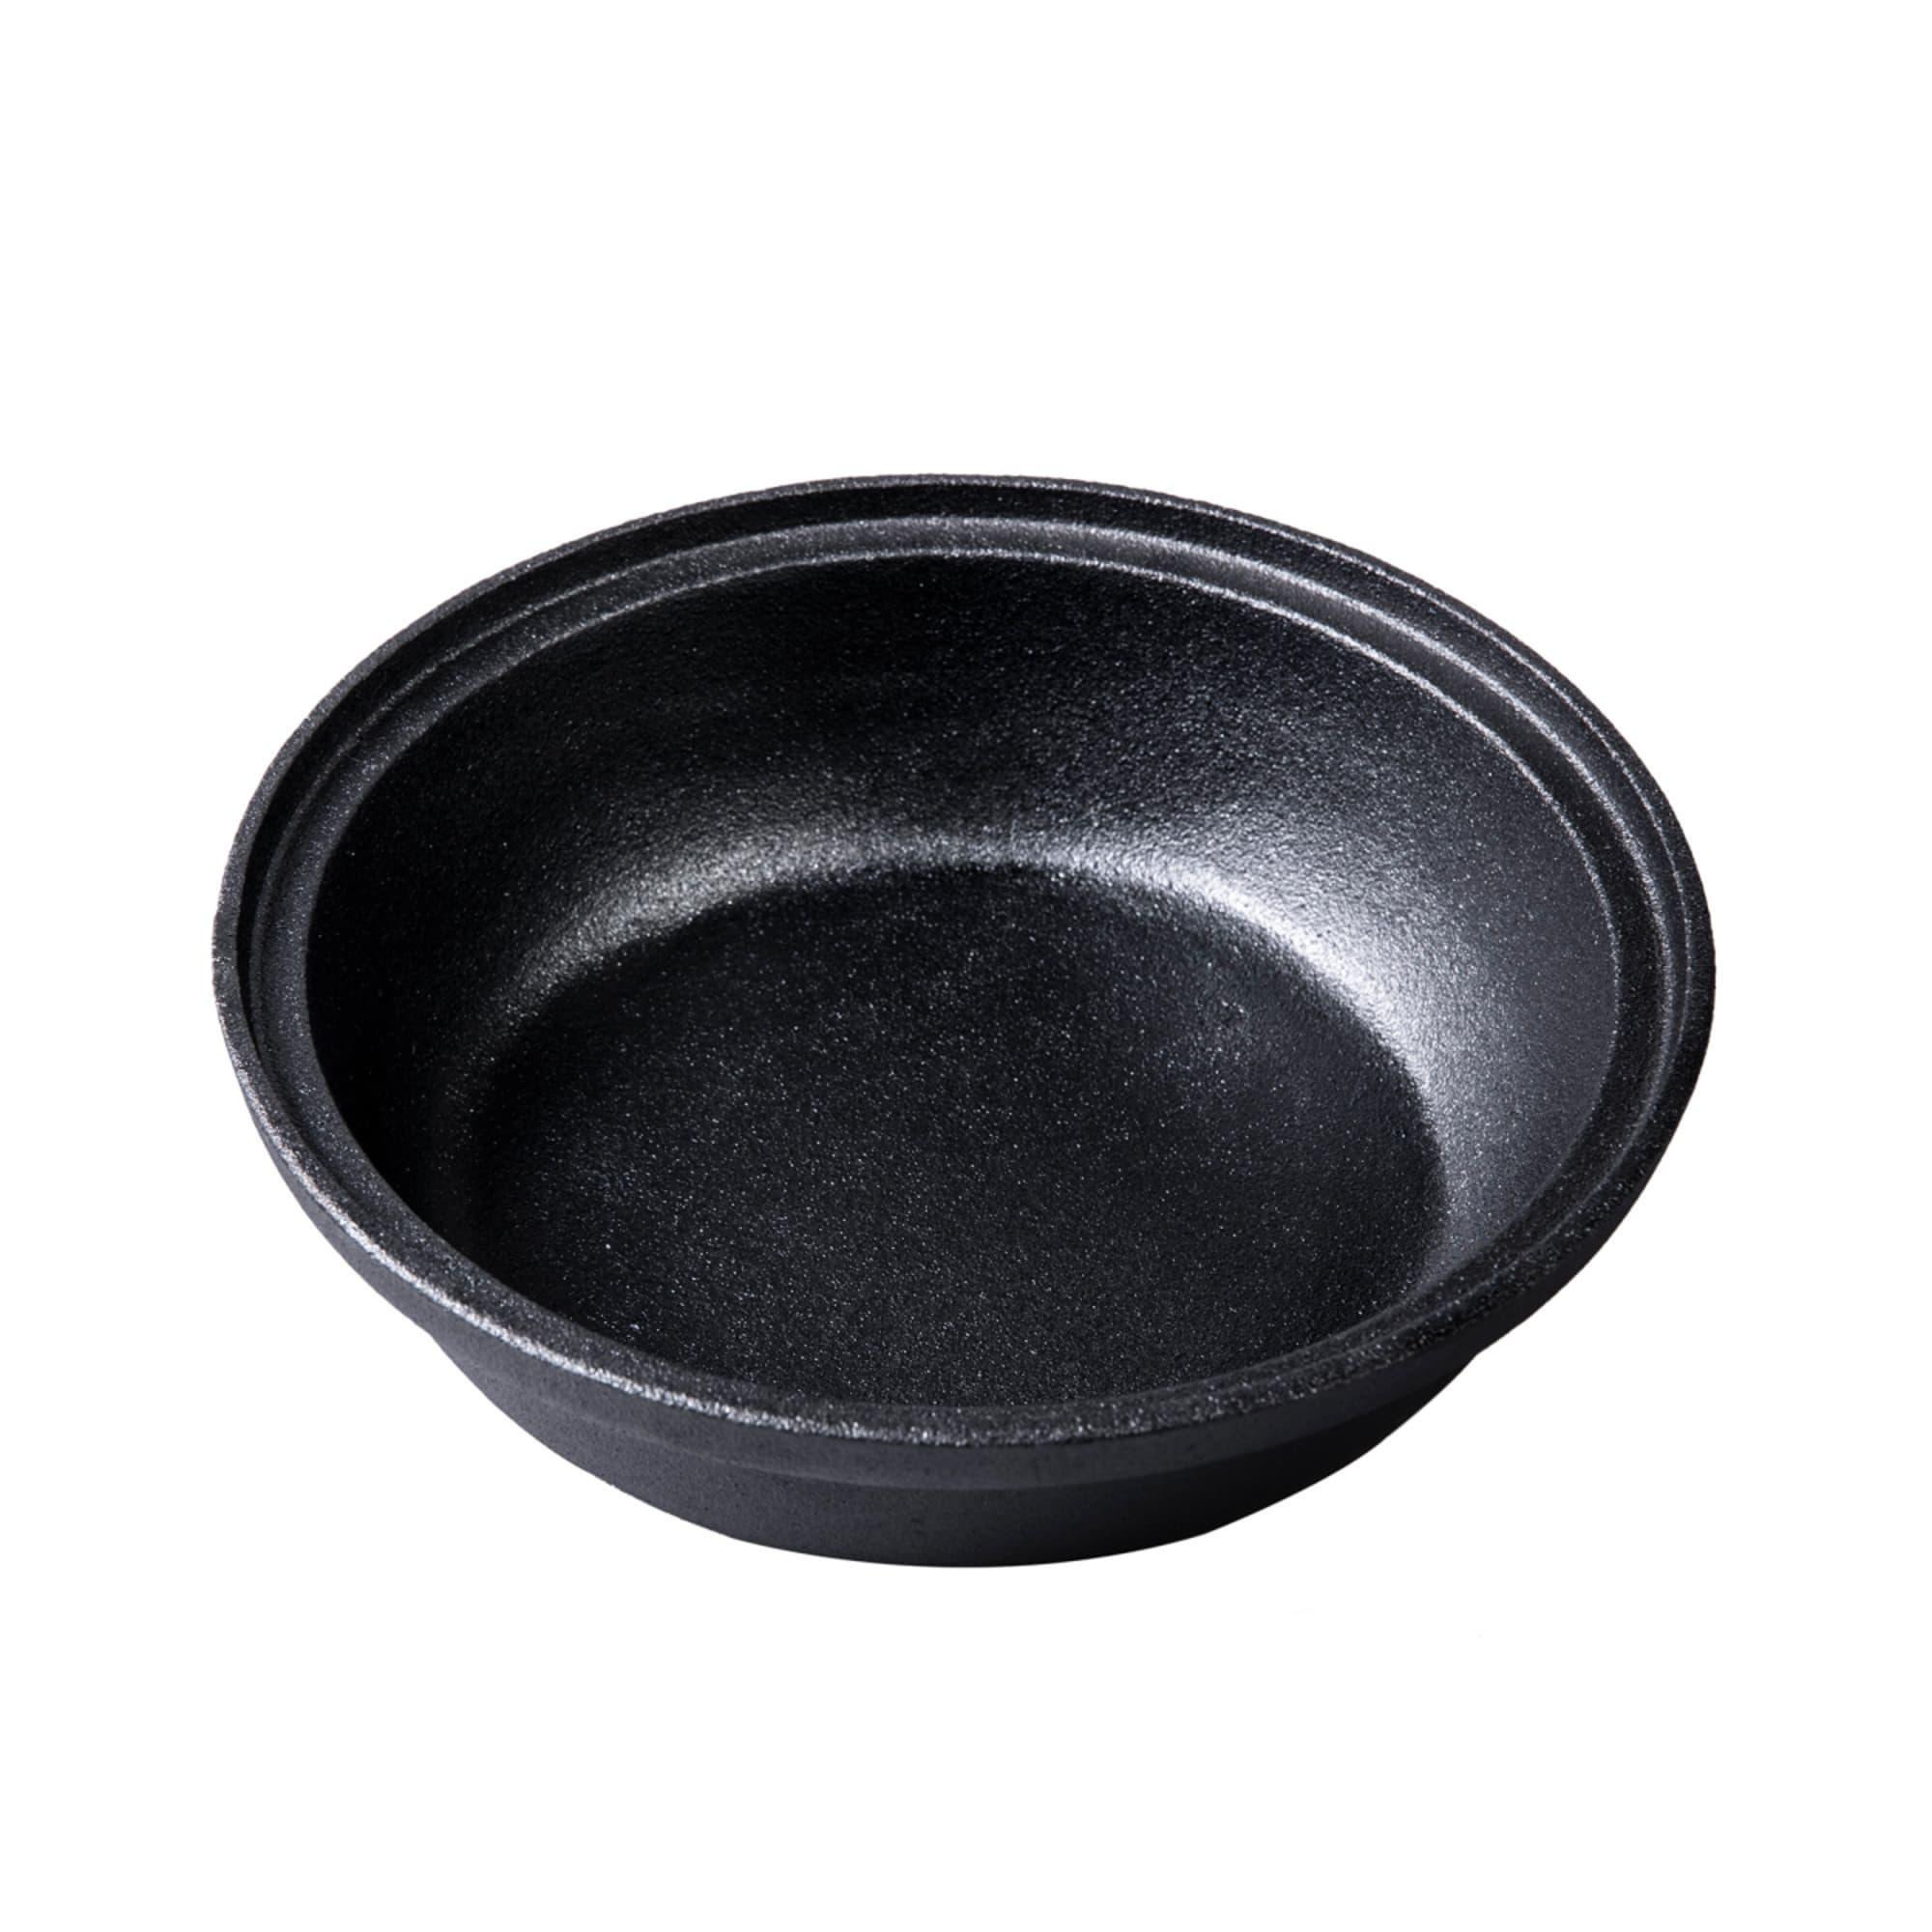 Gourmet Kitchen Signature Cast Iron Tagine With Ceramic Lid Cherry Red D25xh18 5cm Image 4